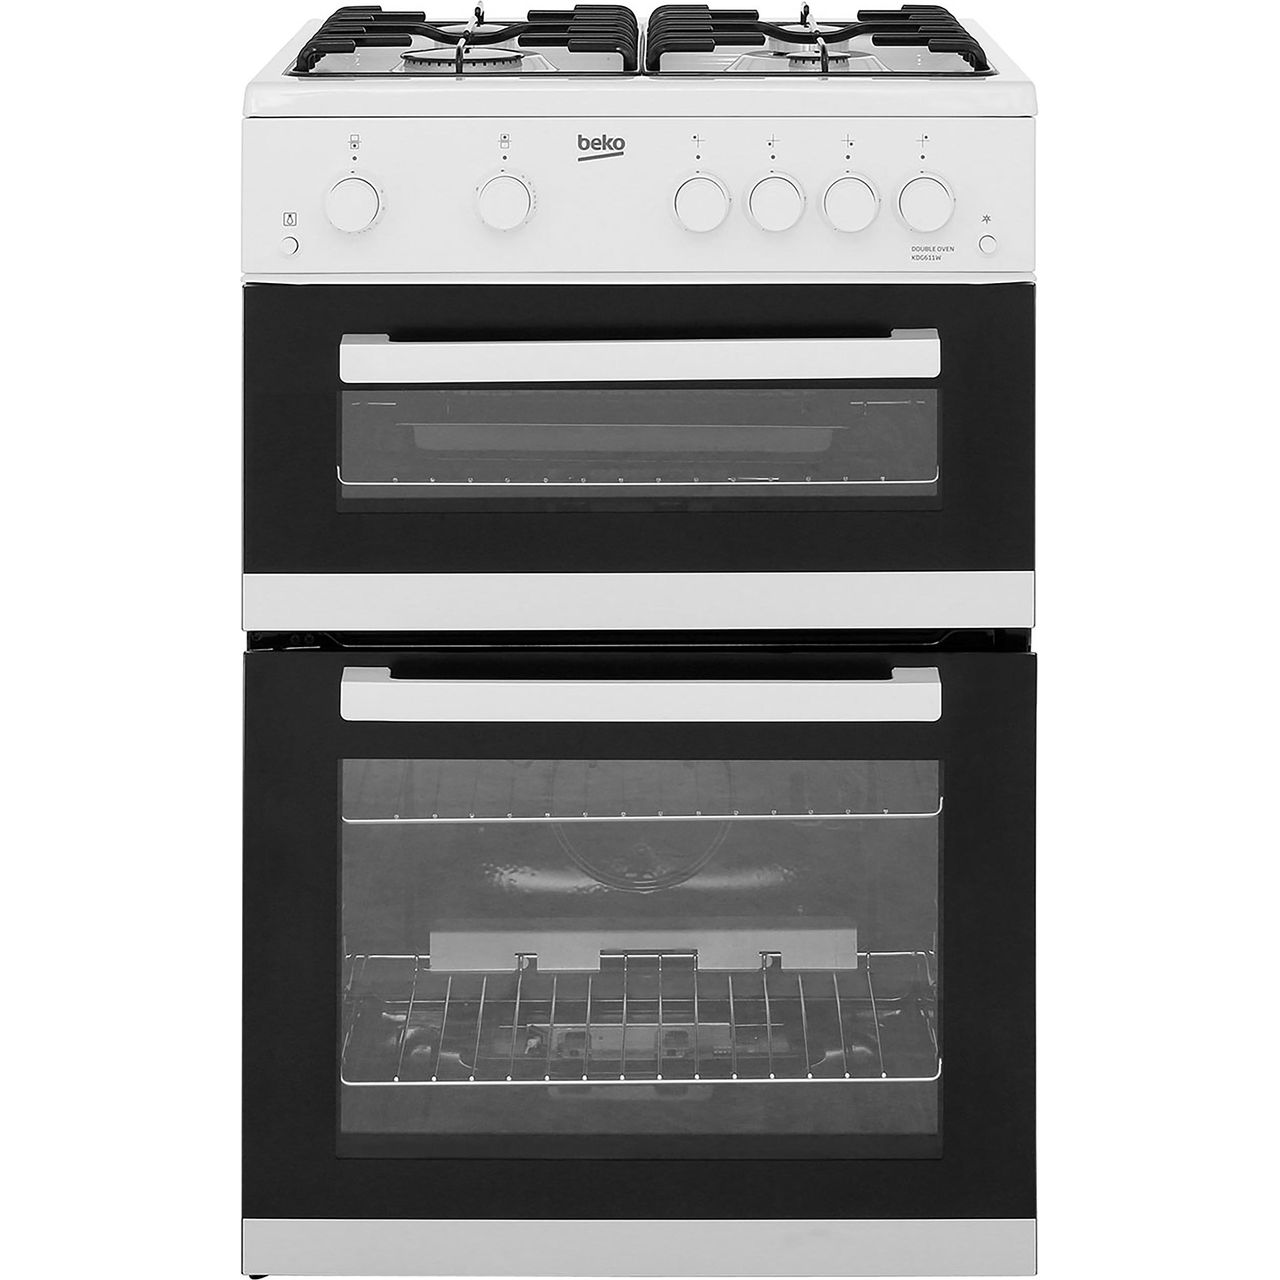 Beko KDG611W 60cm Gas Cooker with Full Width Gas Grill Review